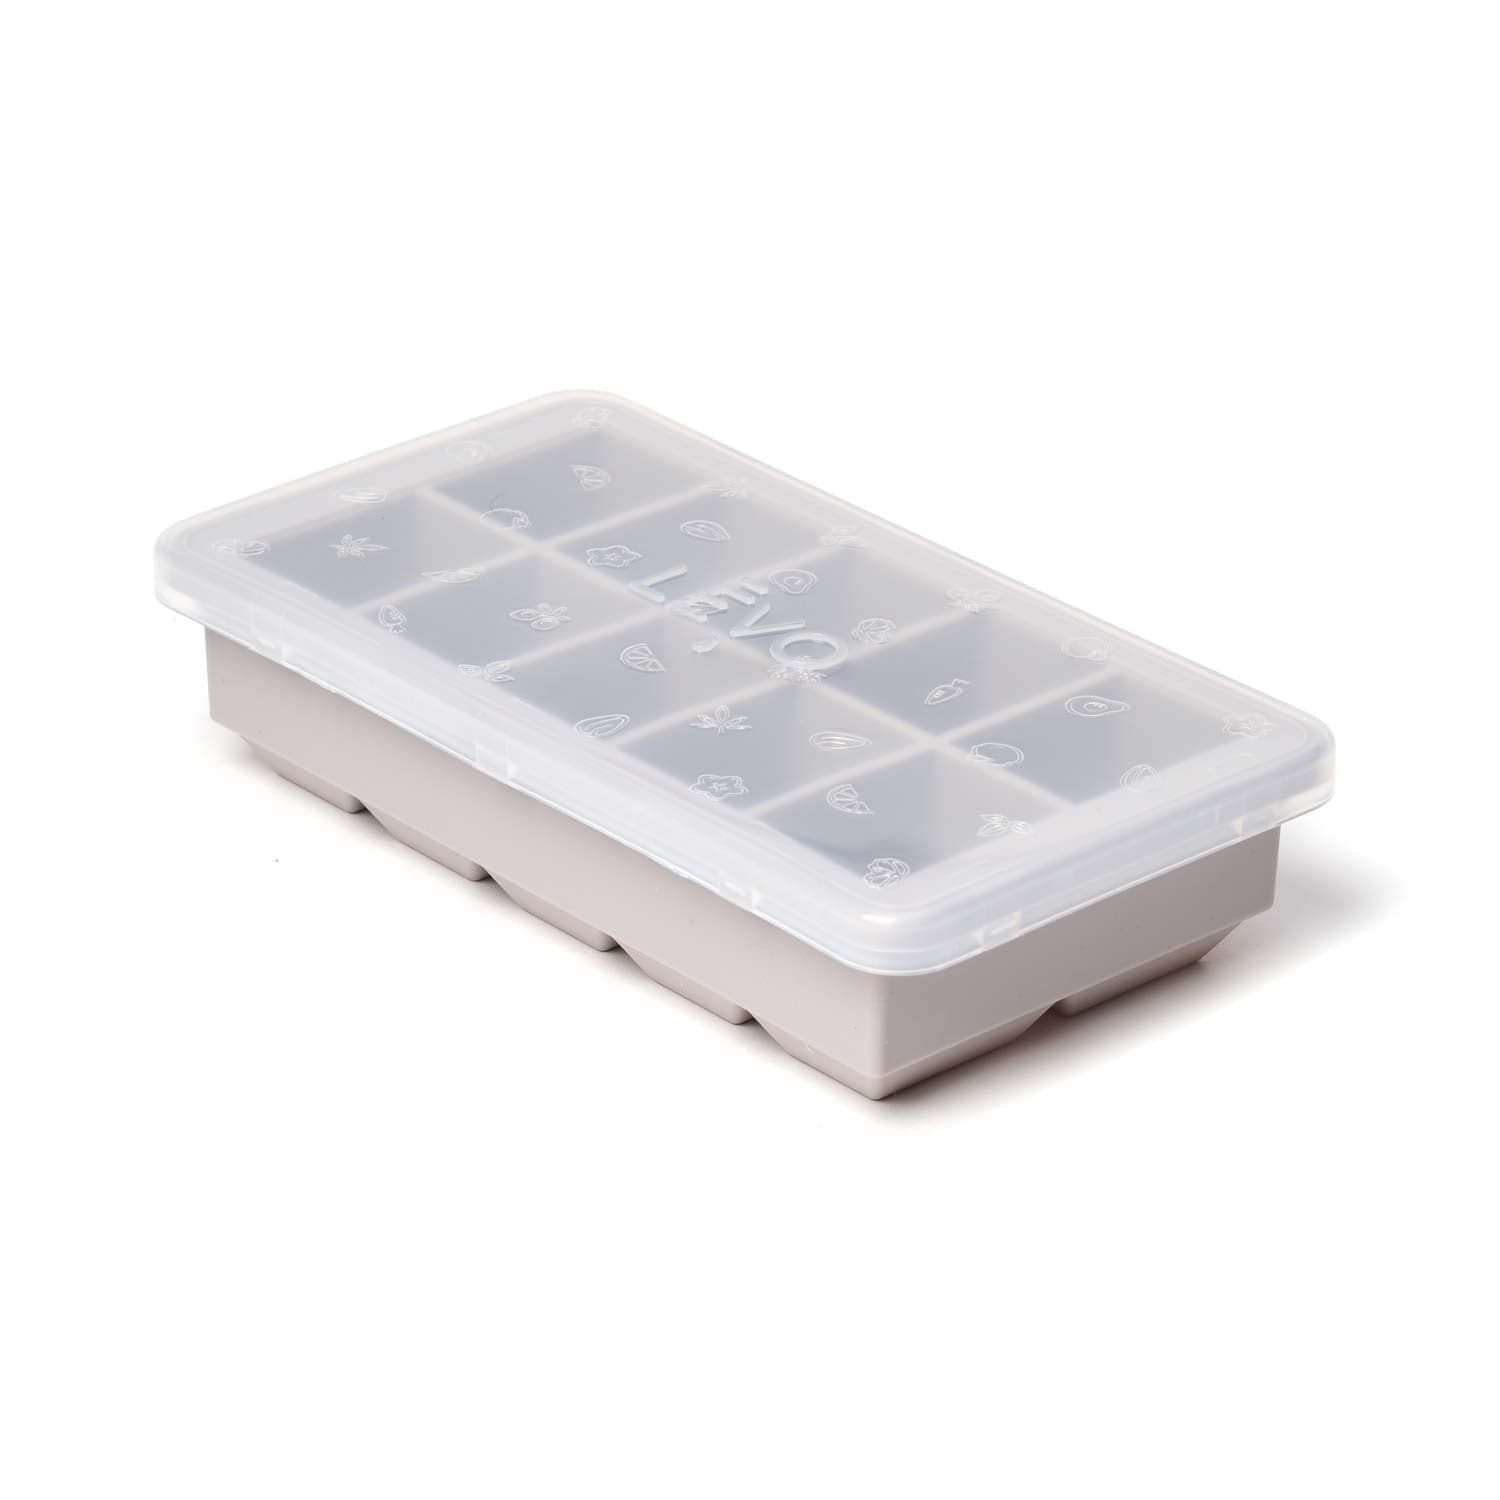 LEVO oil herb block tray in Grey with transparent cap